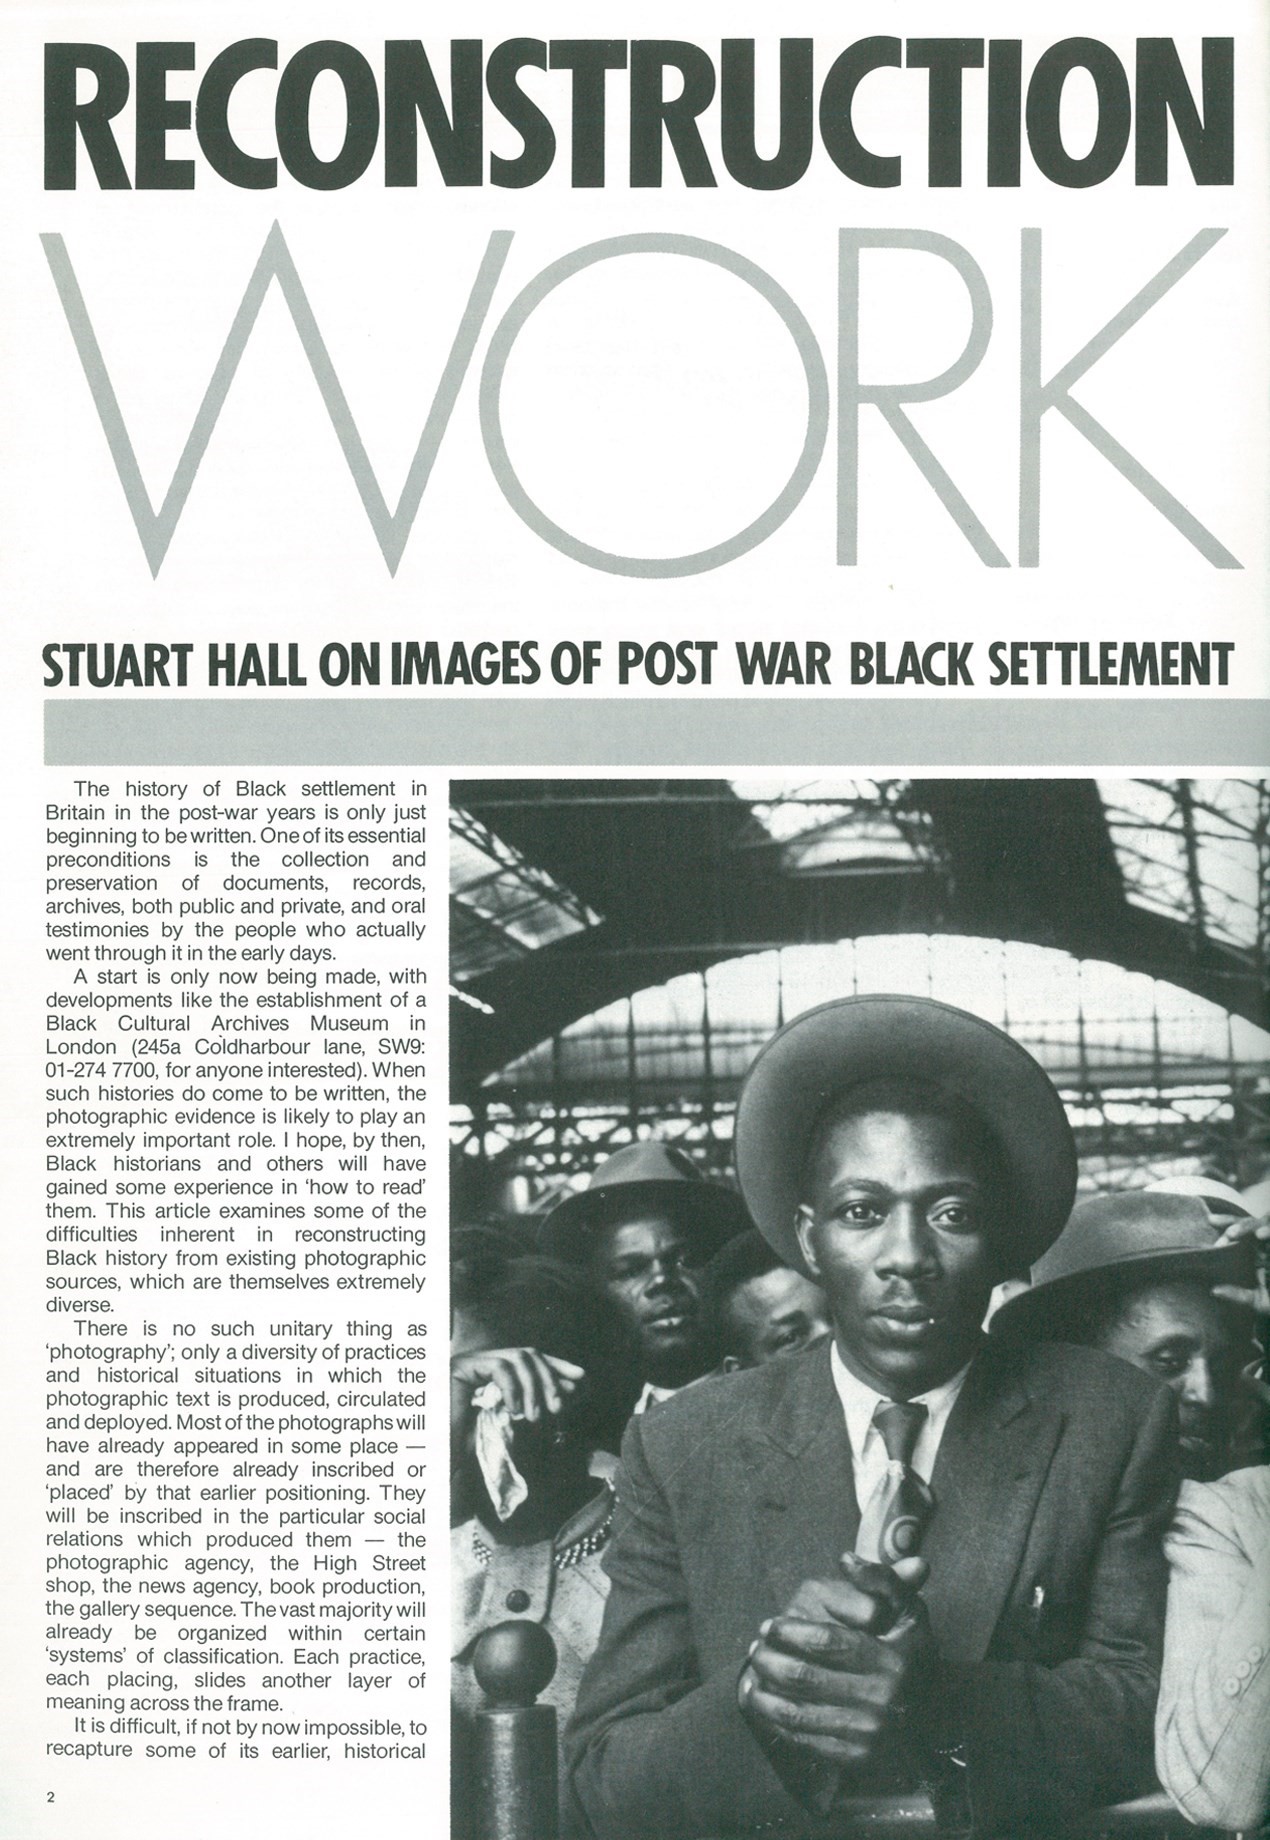 INSIDE THE STUART HALL LIBRARY ARCHIVES